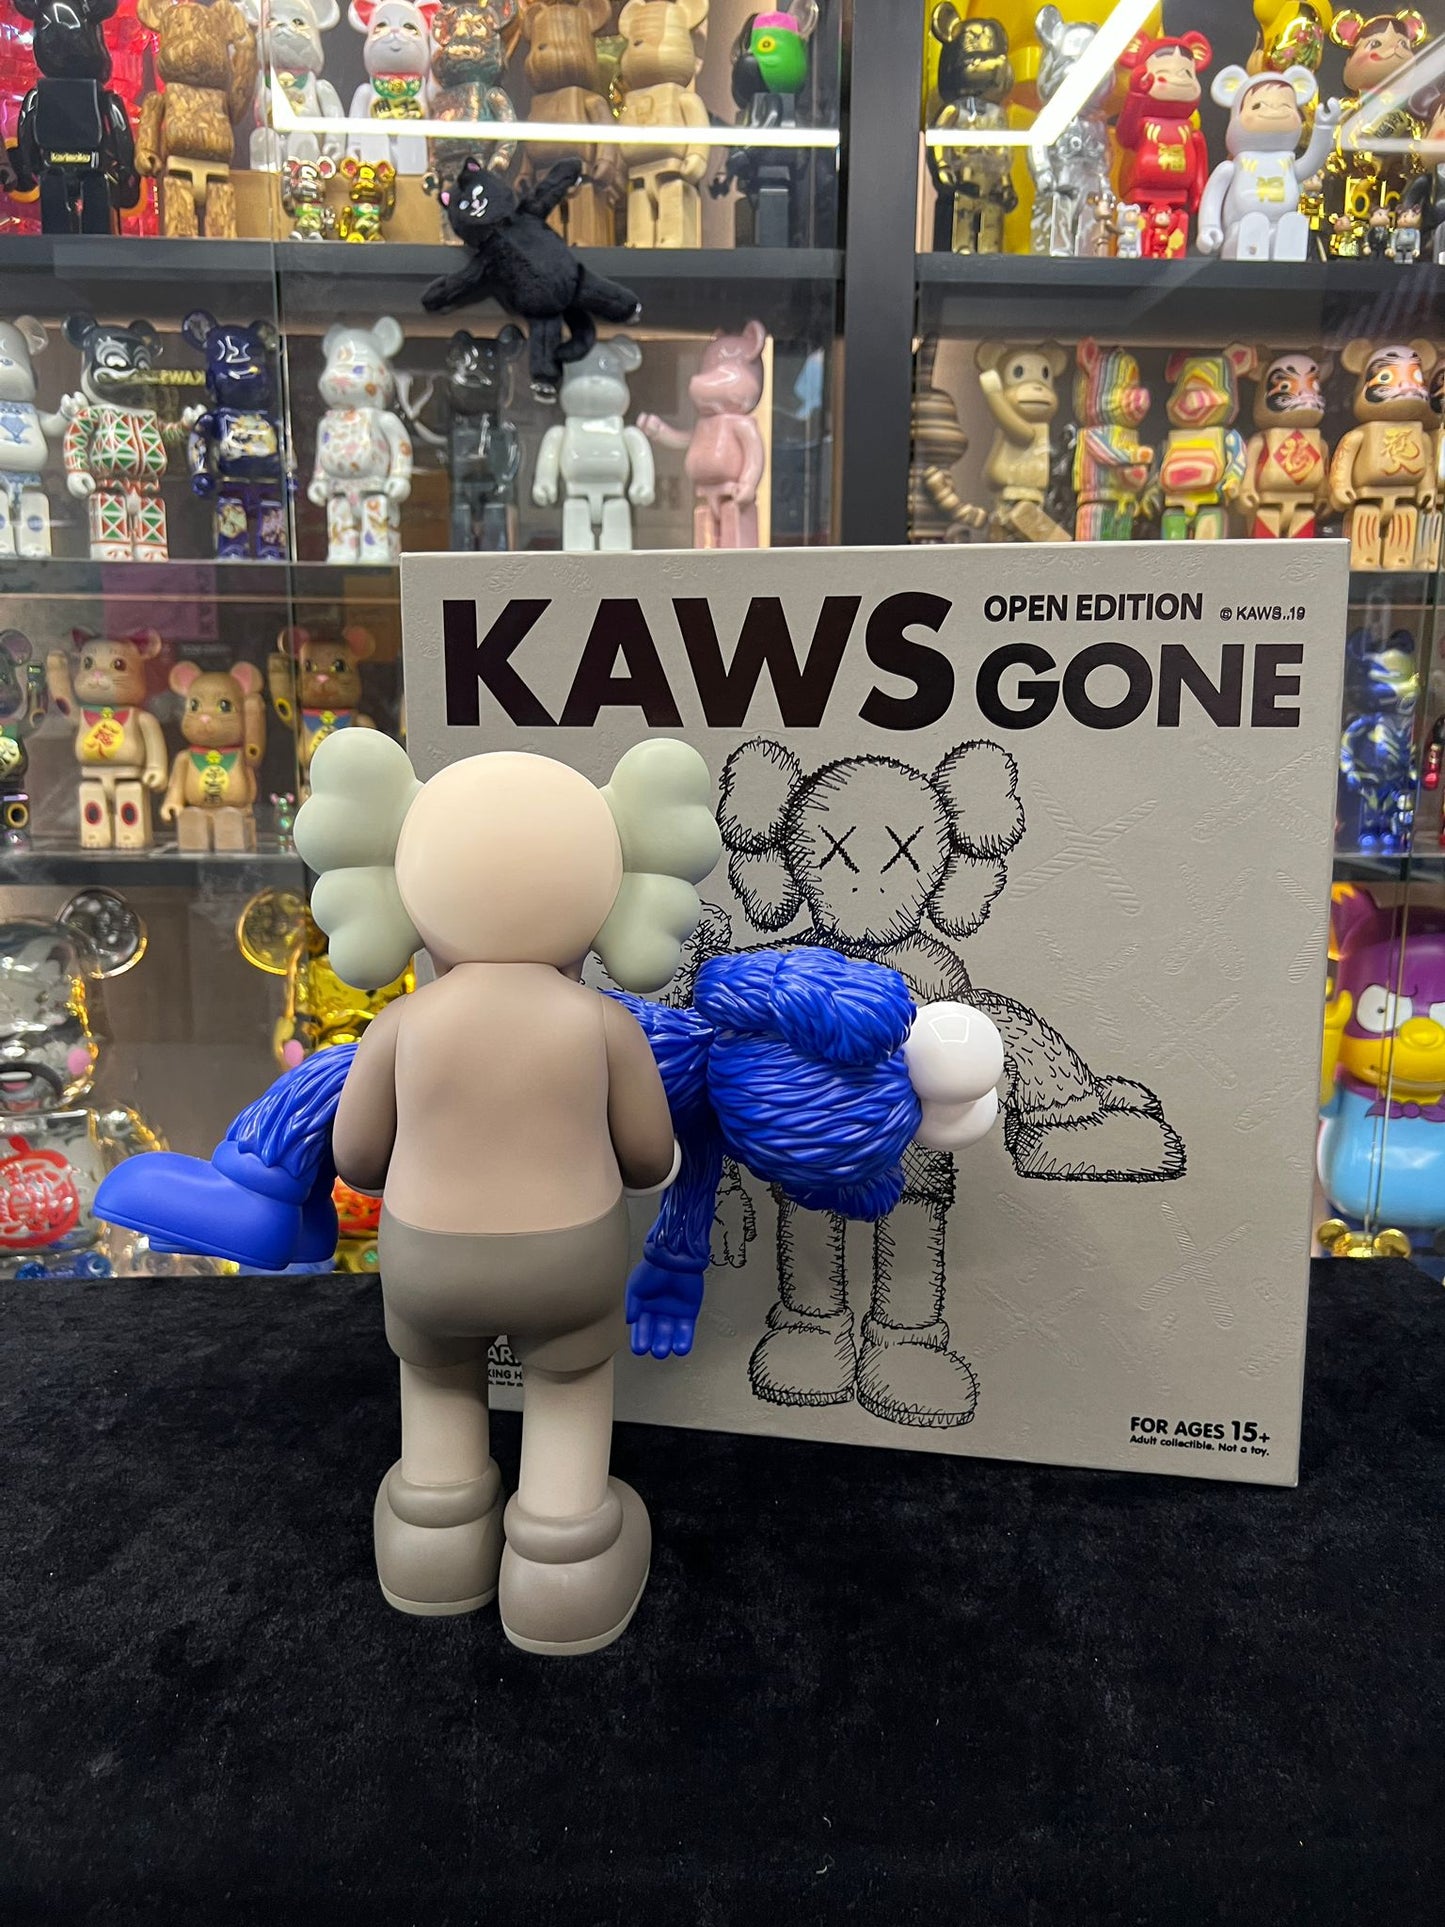 Kaws Gone 2019 (Open Edition)(Brown)